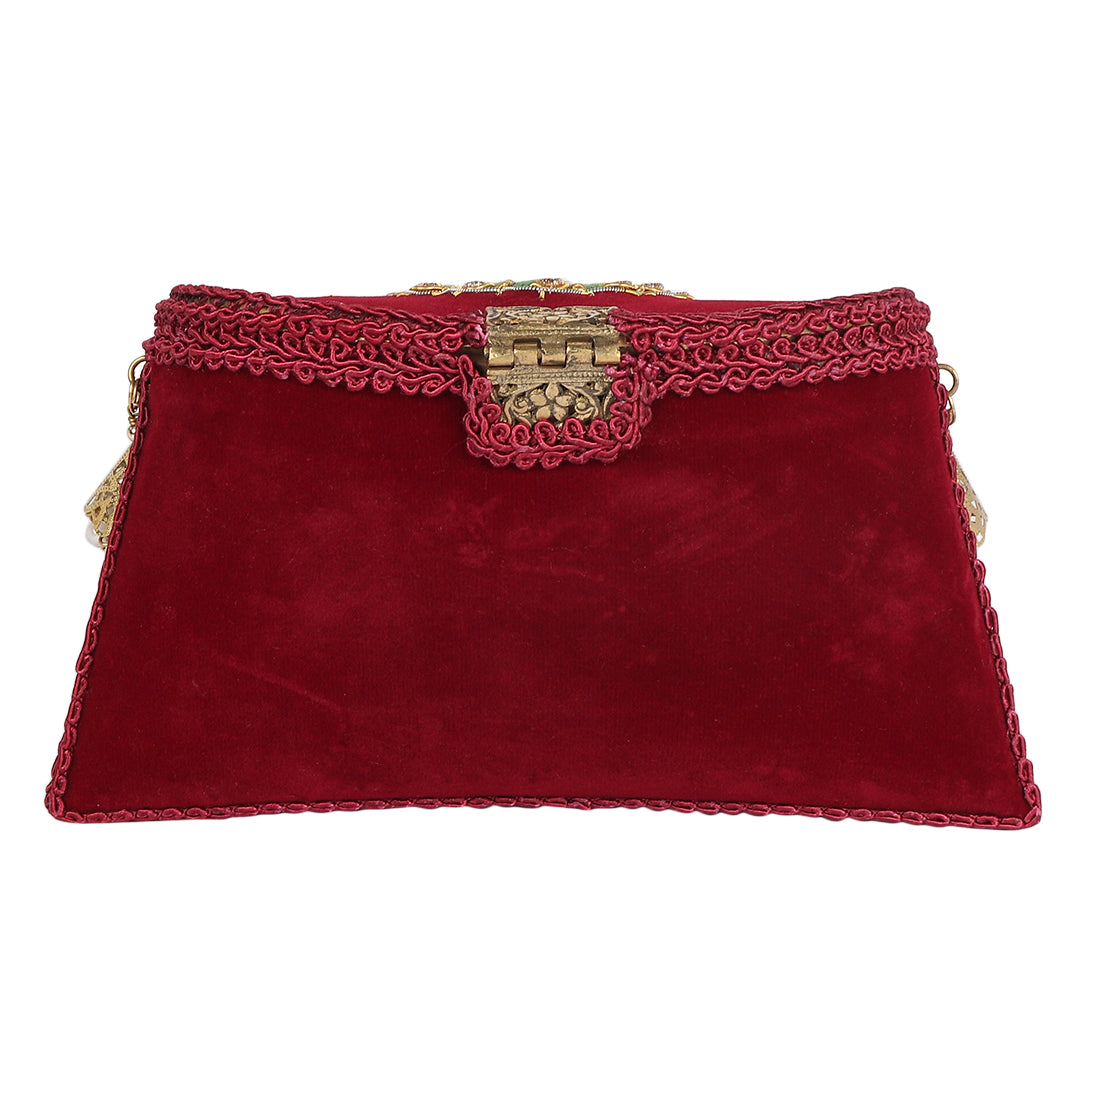 Peacock Embroidery Purse Maroon Color